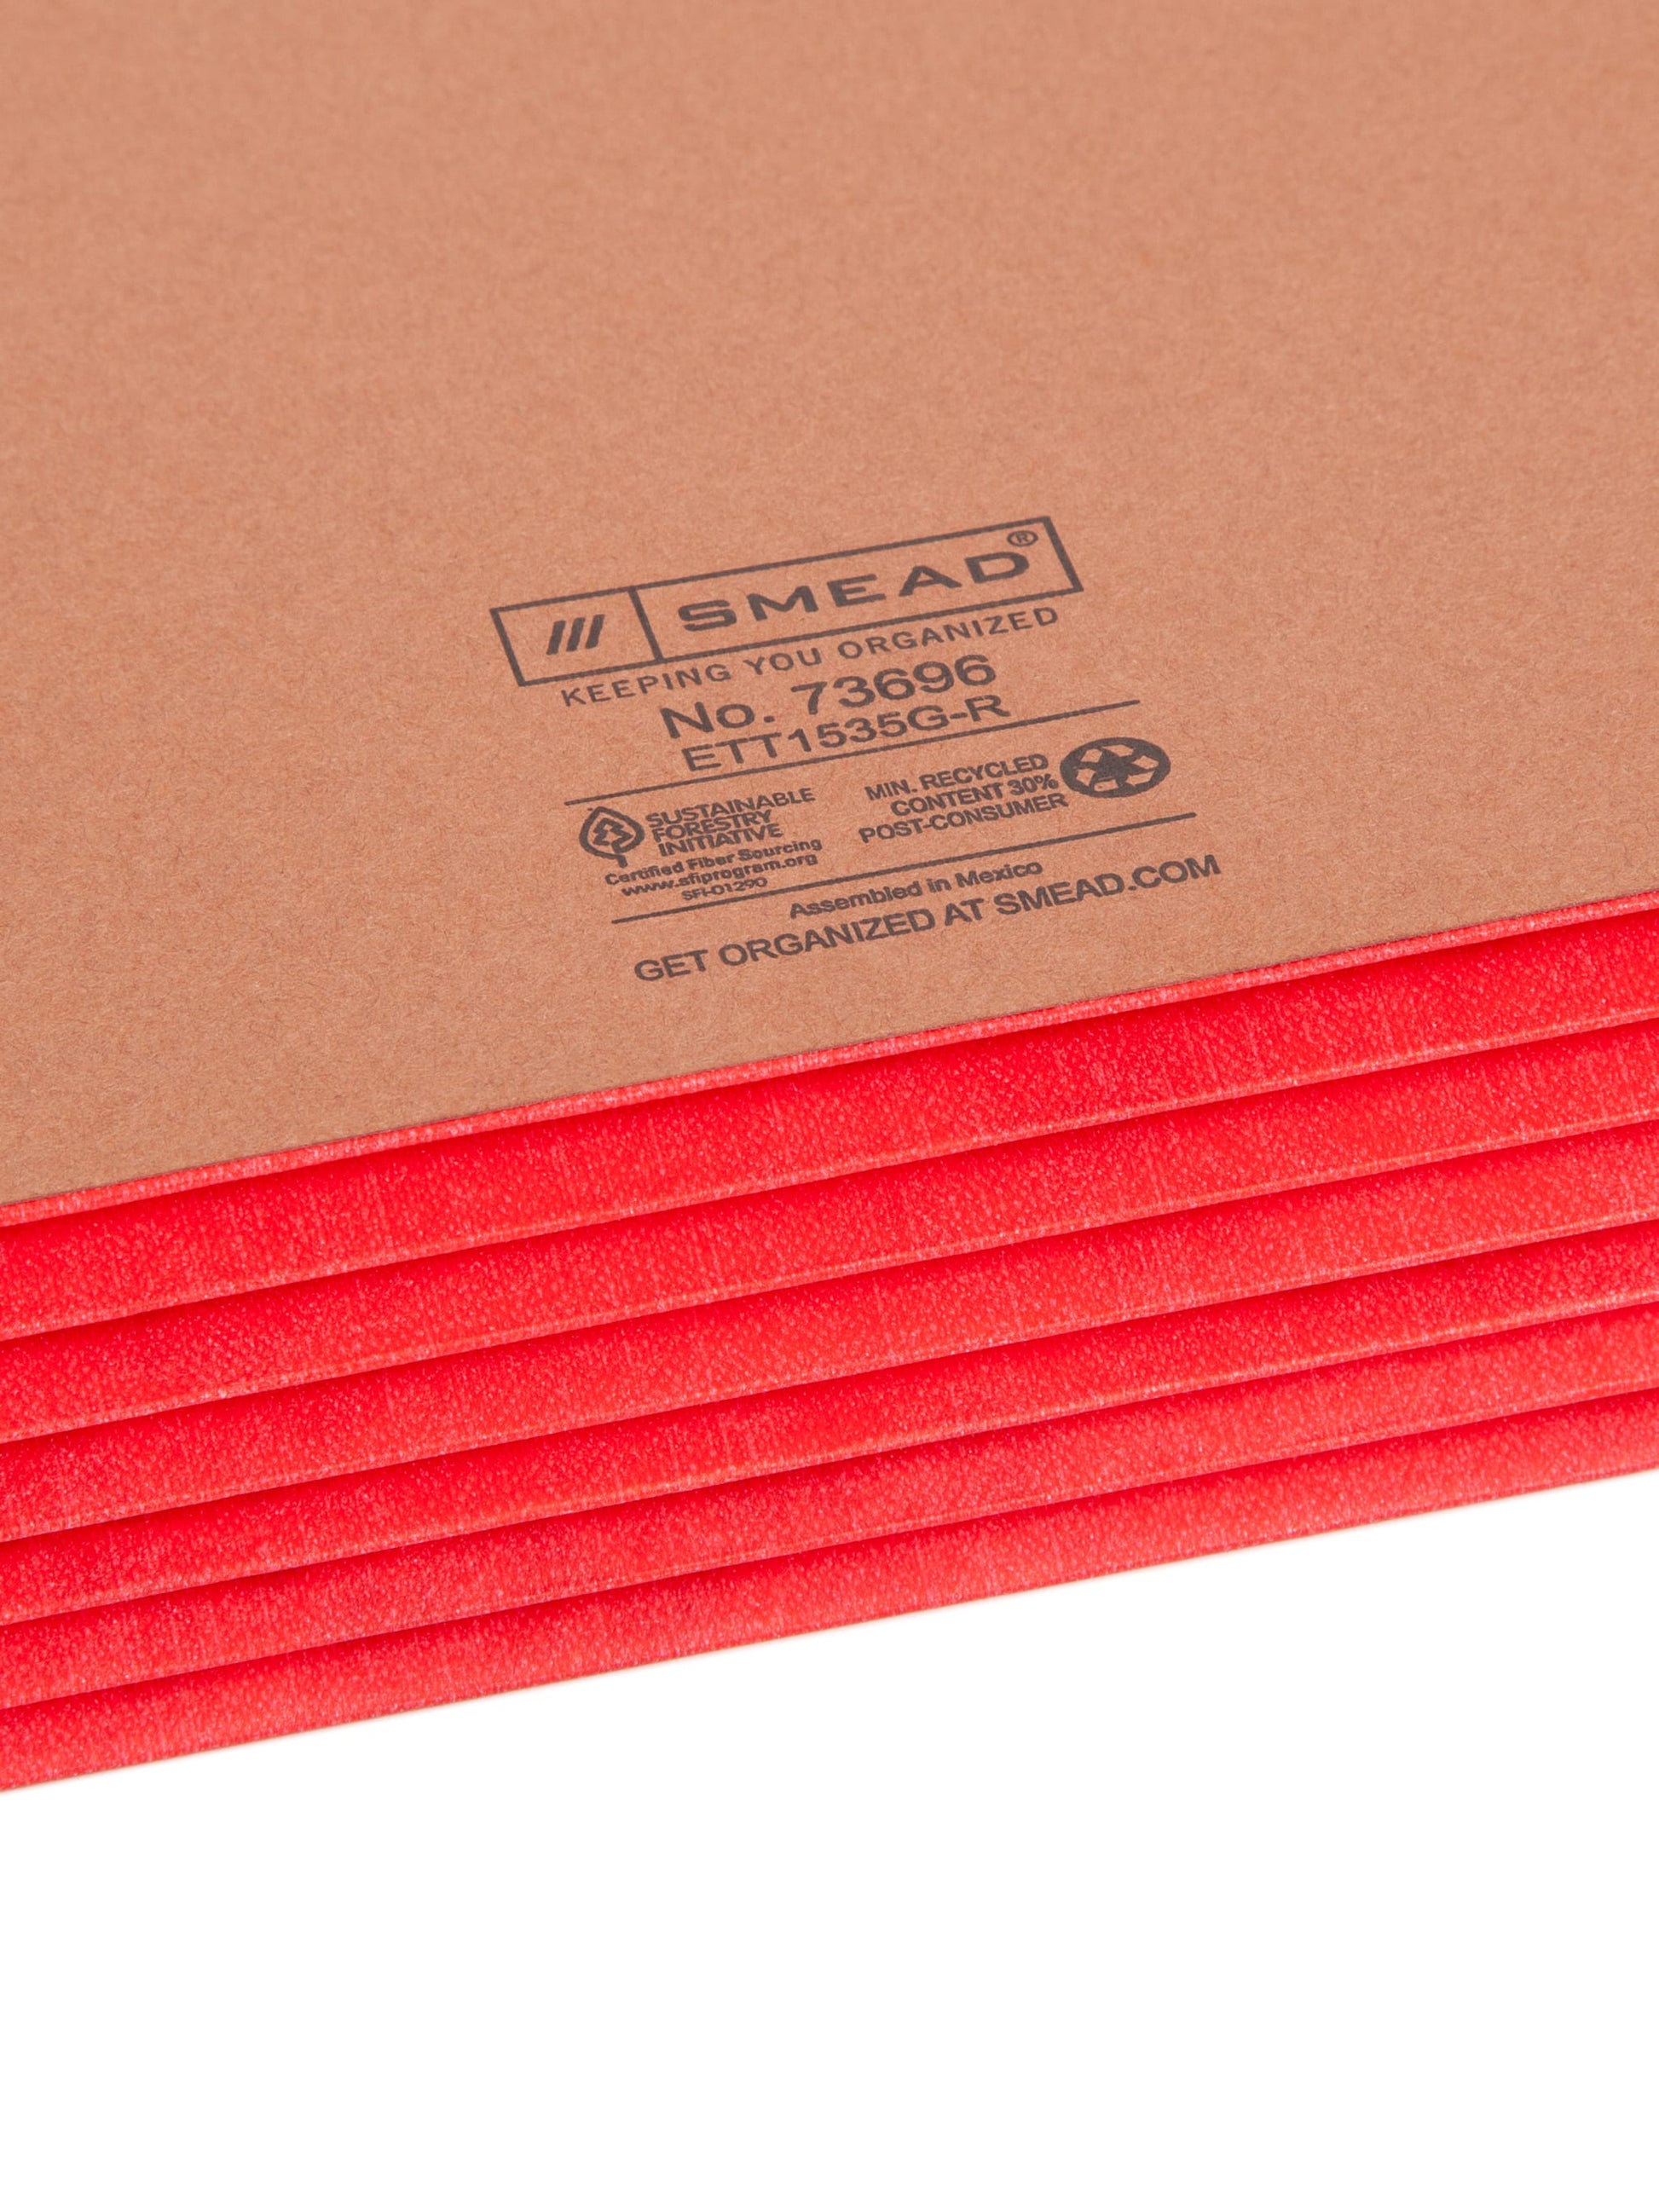 Reinforced End Tab File Pockets, Straight-Cut Tab, 5-1/4 inch Expansion, Red Color, Extra Wide Letter Size, Set of 0, 30086486736962